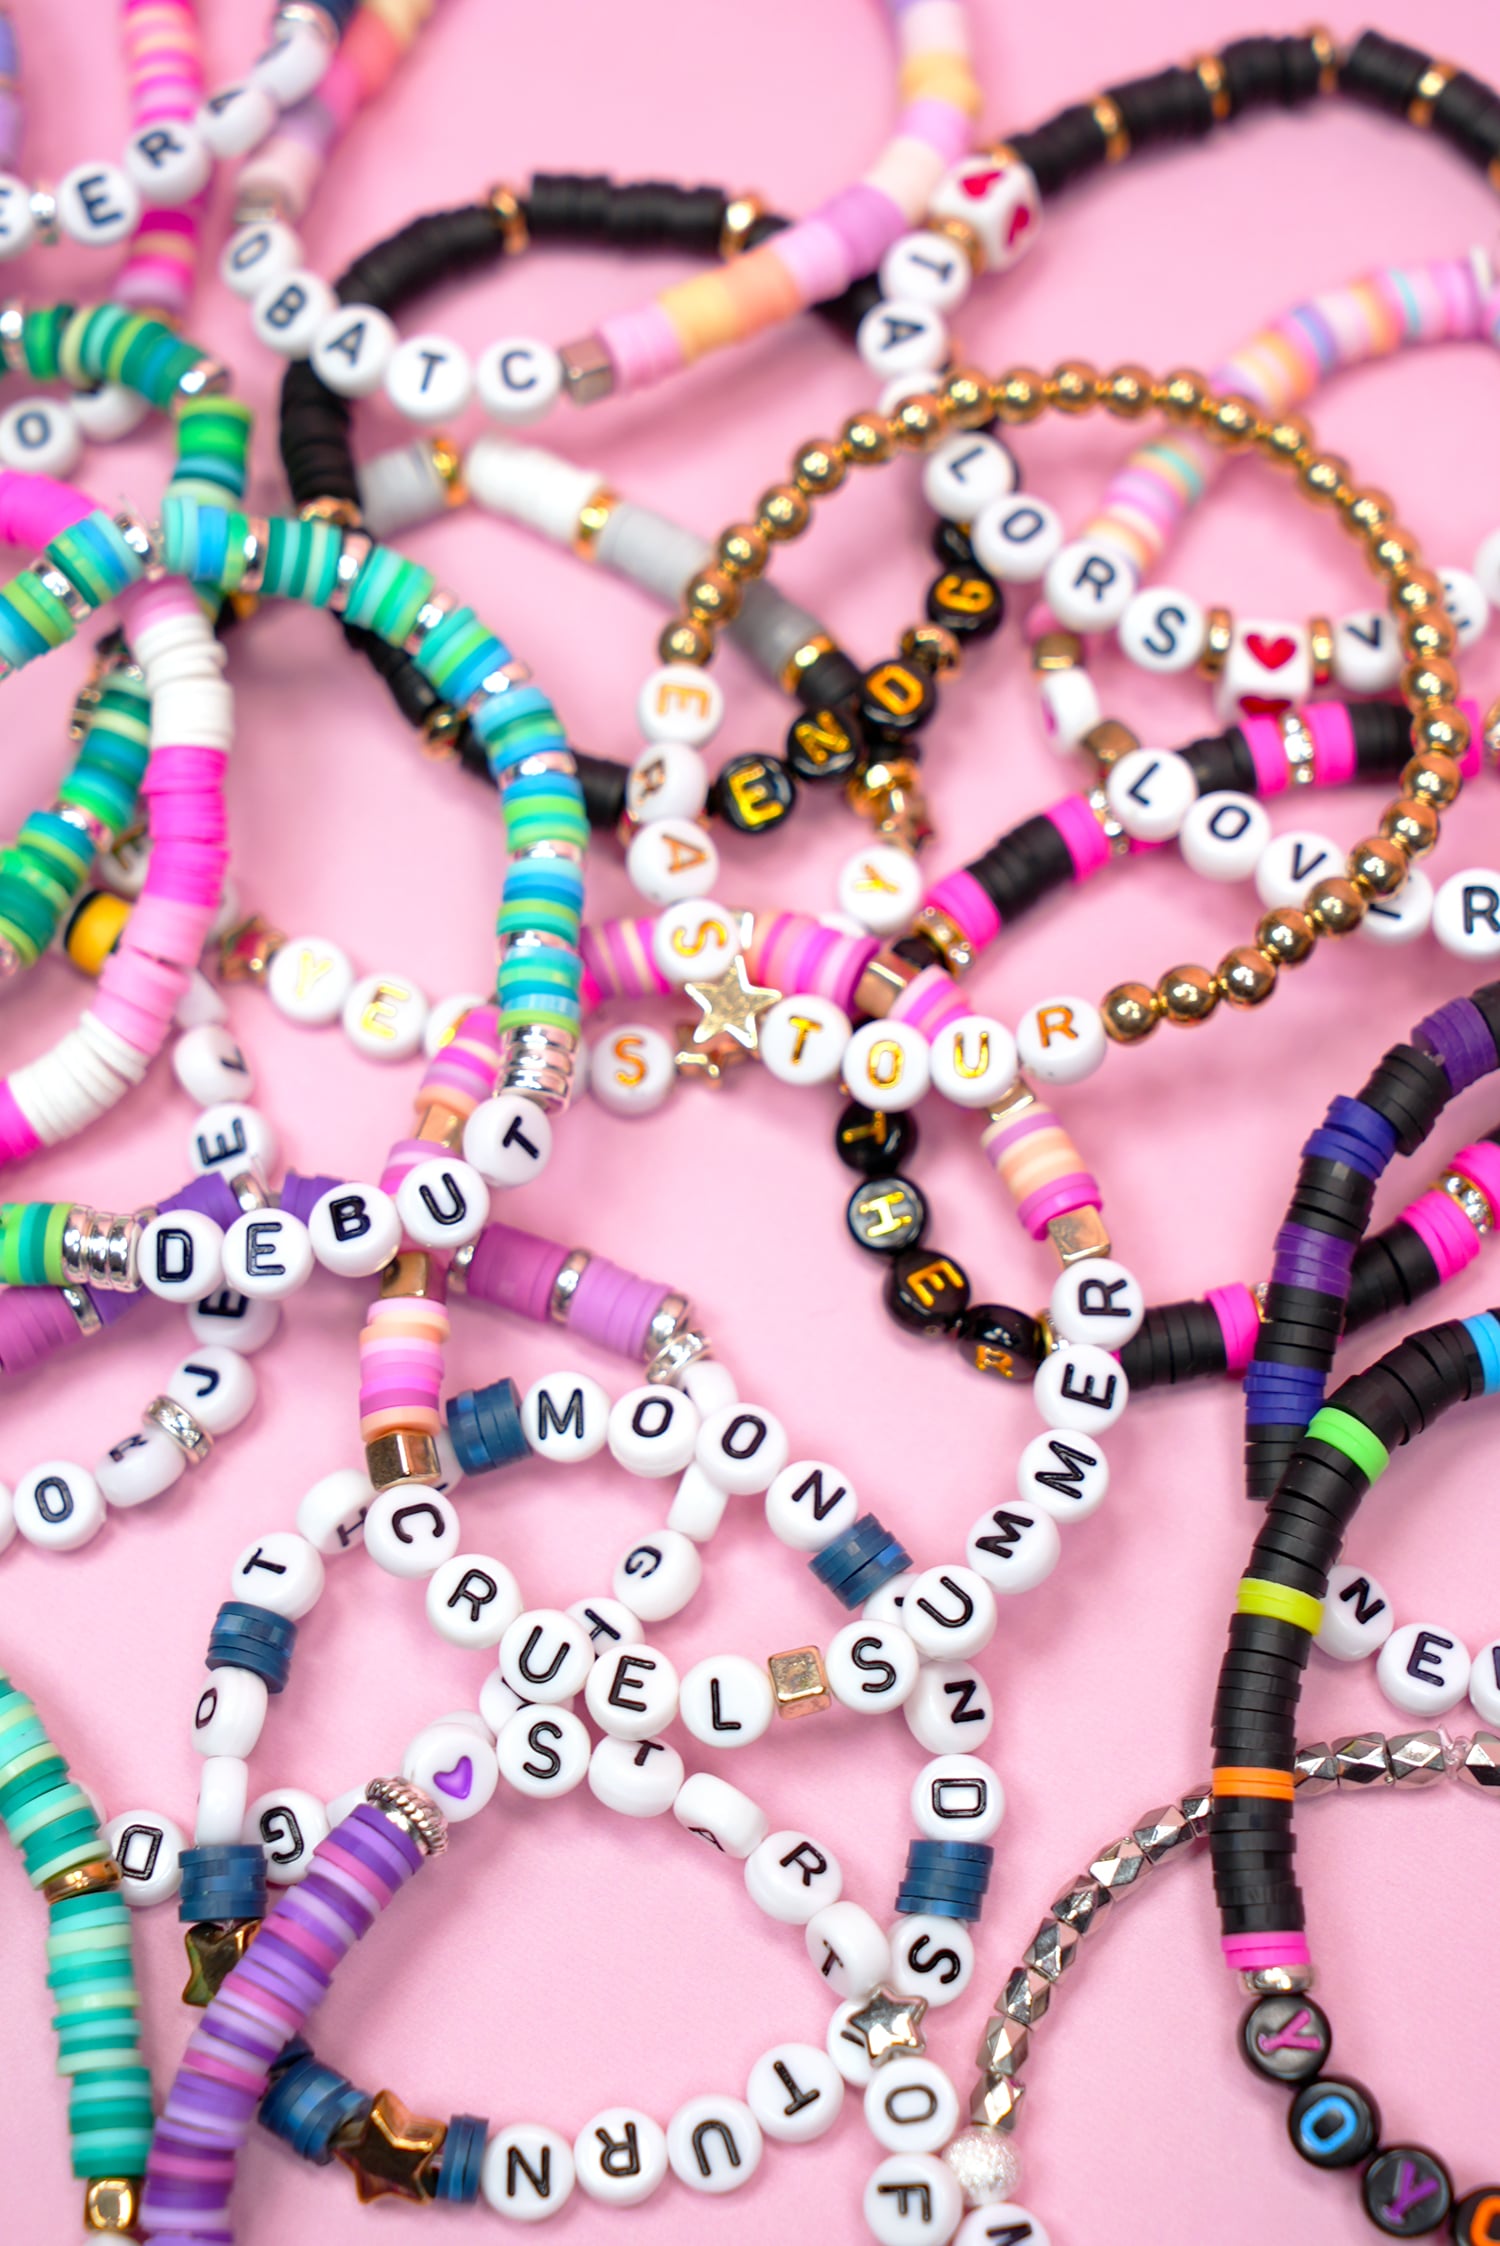 Gather your friends and Make Taylor Swift Friendship Bracelets as a fun pre-game activity. This craft not only adds a personal touch to your decor but also serves as a delightful party favor for your guests. This post shares 435 adorable bracelet ideas! 